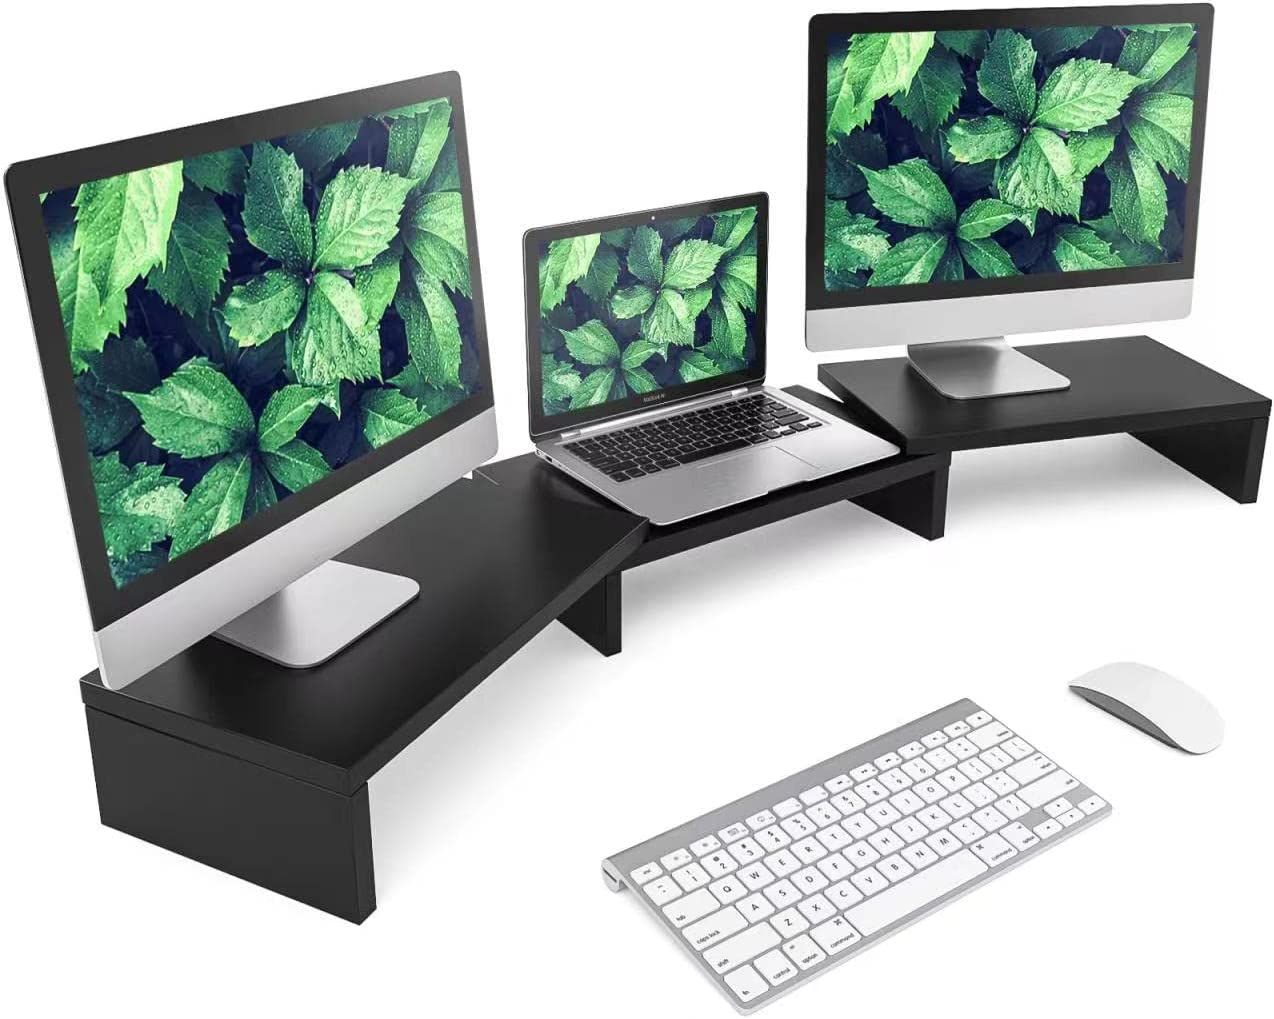 Tidy up your desk!  These monitor stands will help you (adv)